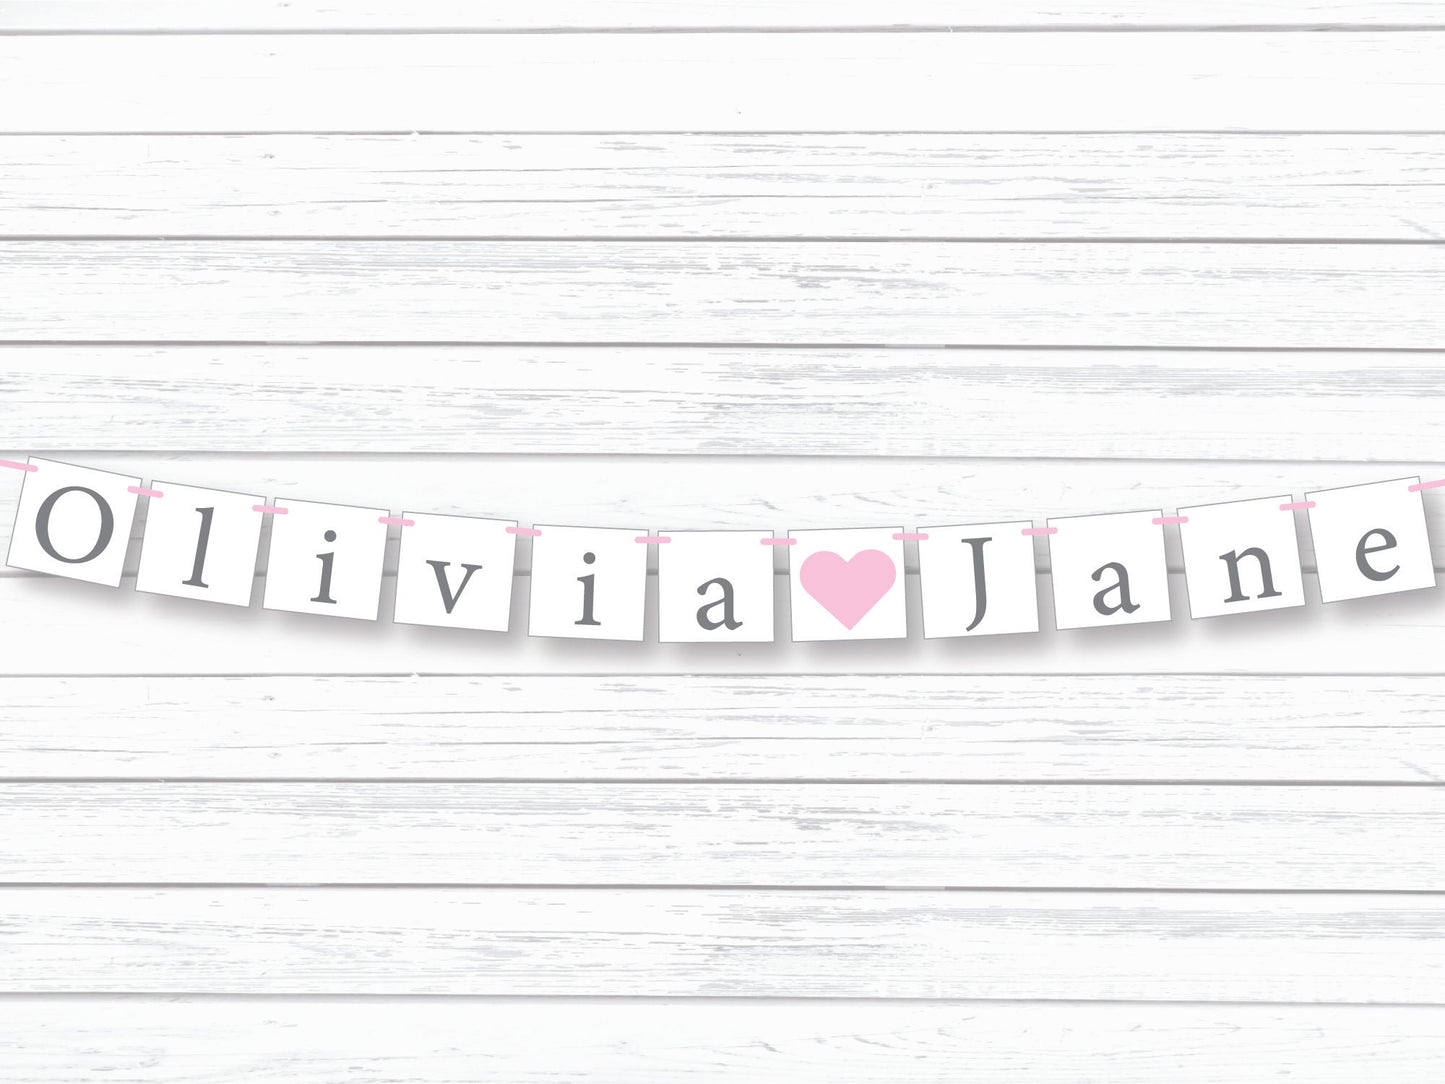 custom baby name banner for baby shower decoration, personalized name nursery decor, girl baby garland, its a girl bunting, girl name sign